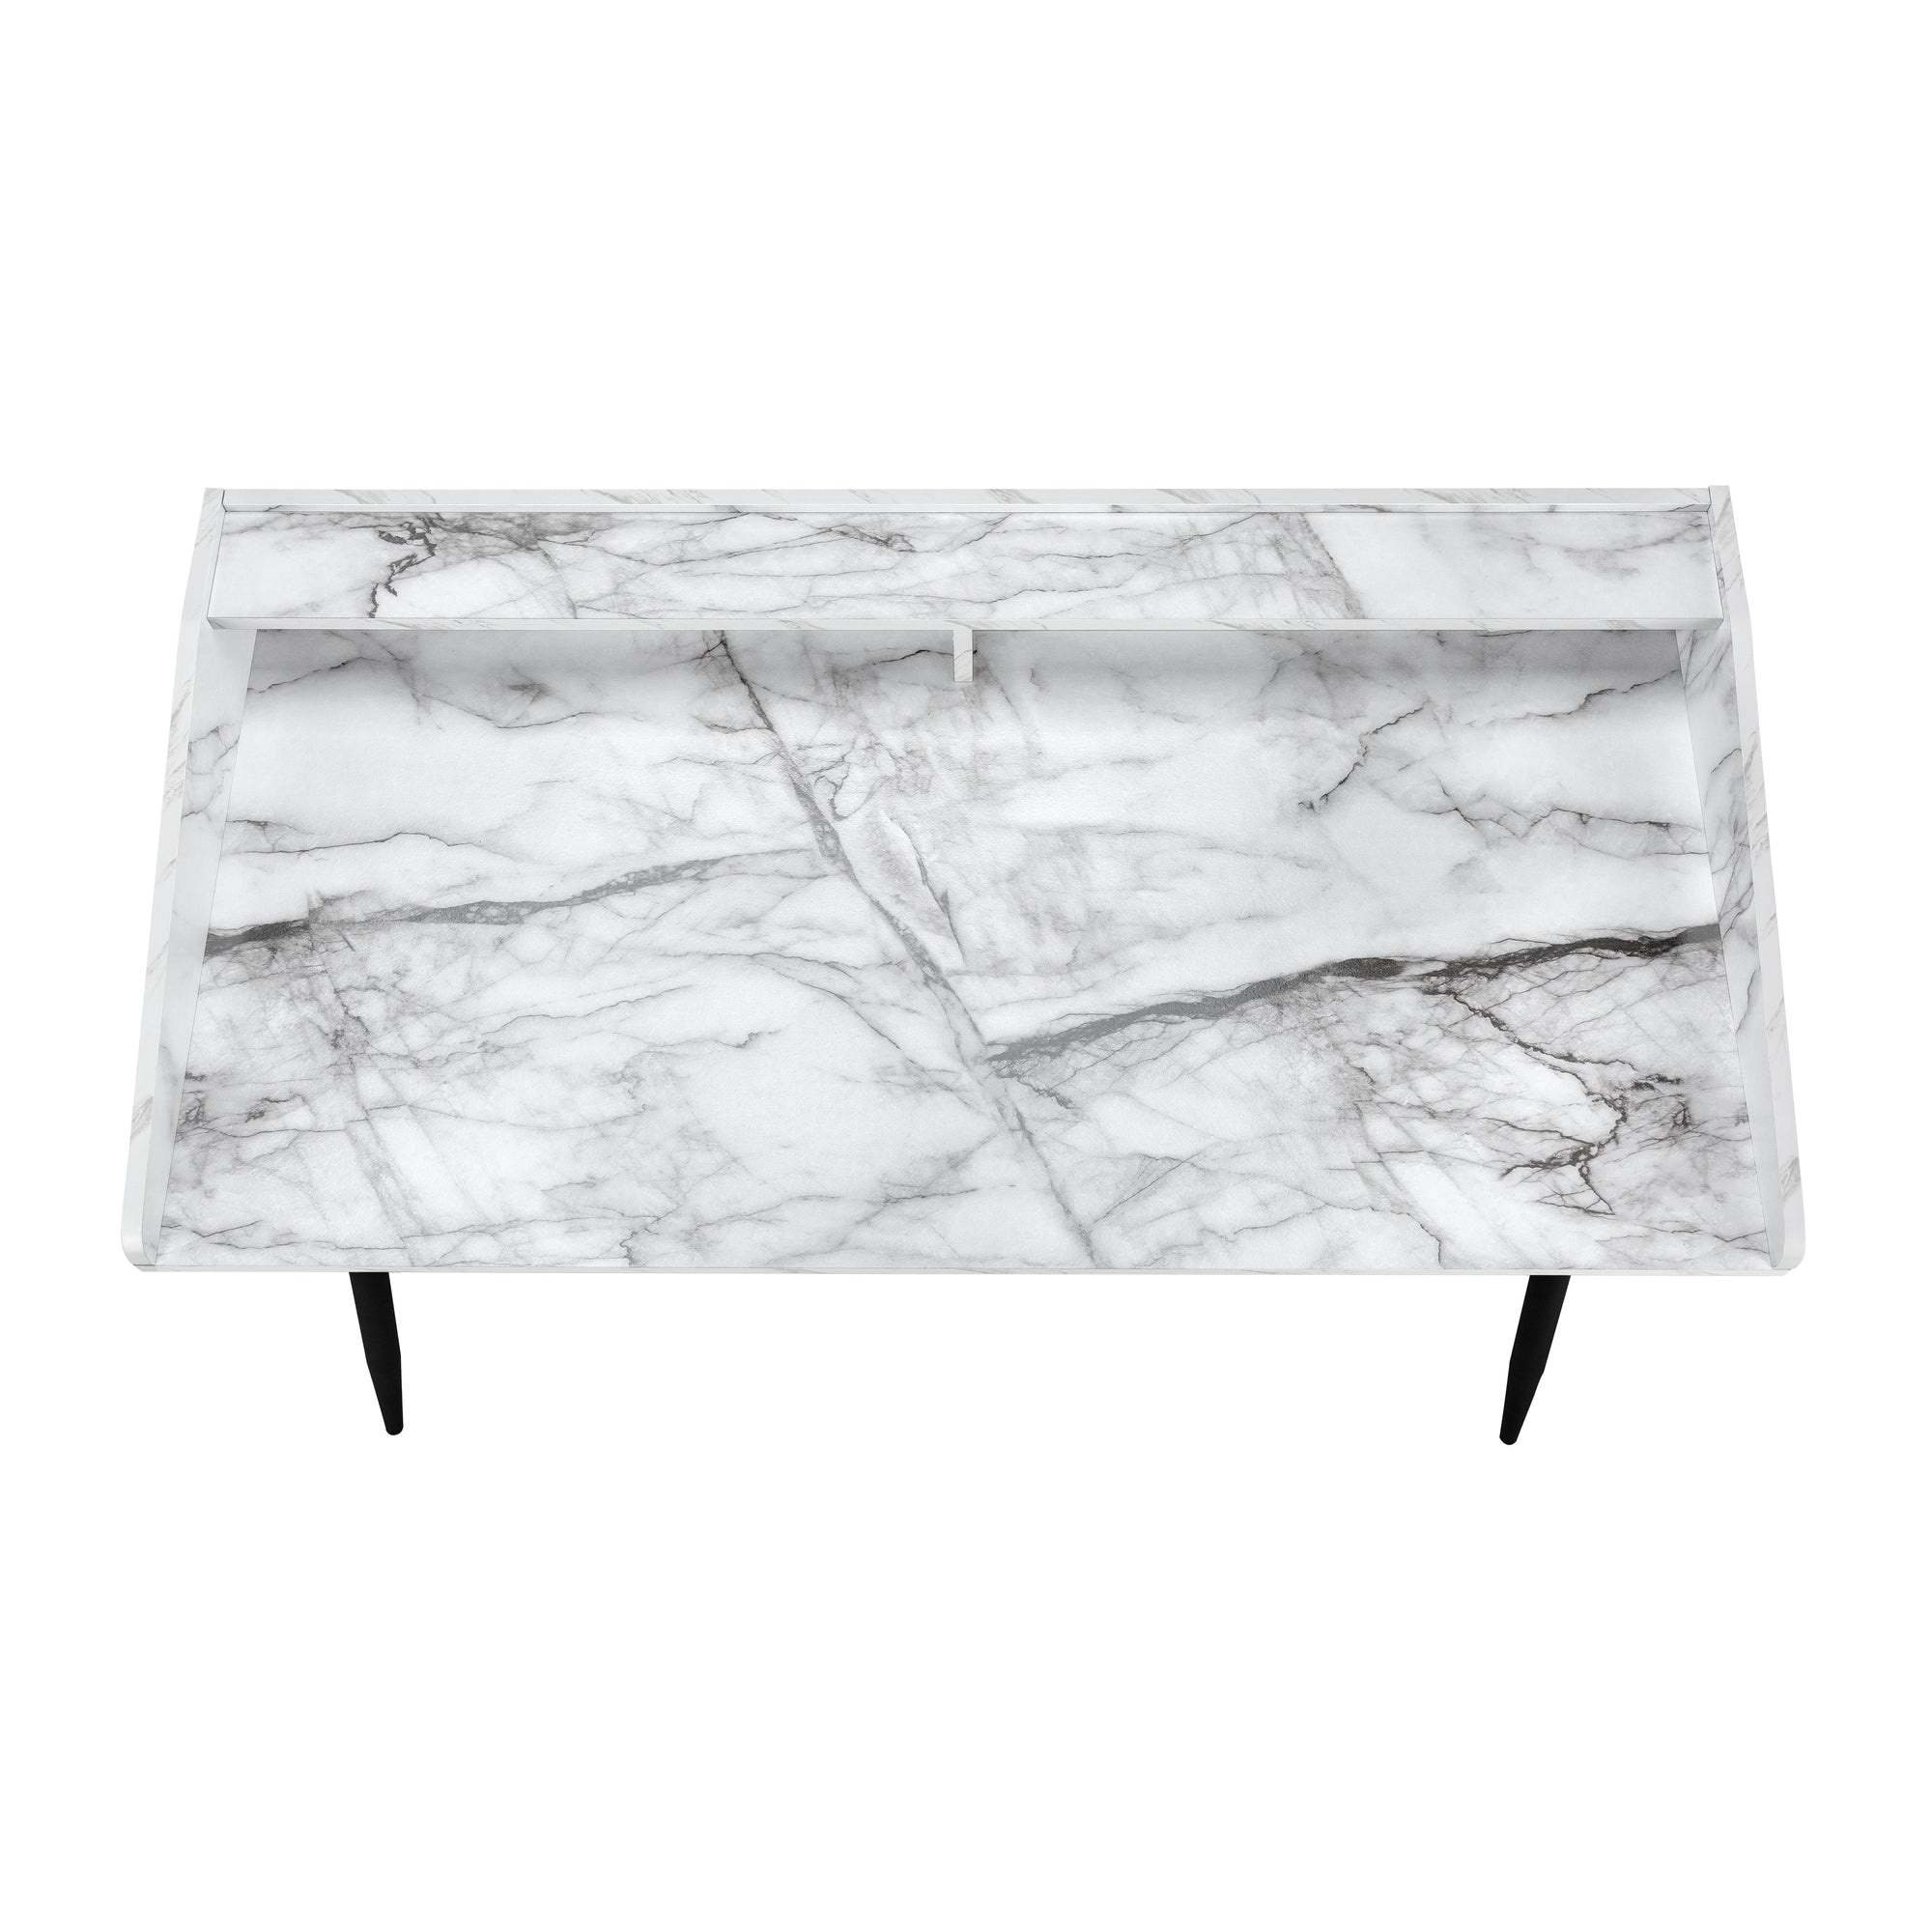 MN-707539    Computer Desk, Home Office, Laptop, Storage Shelves, 48"L, Metal Legs, Laminate, White Marble Look, Contemporary, Modern